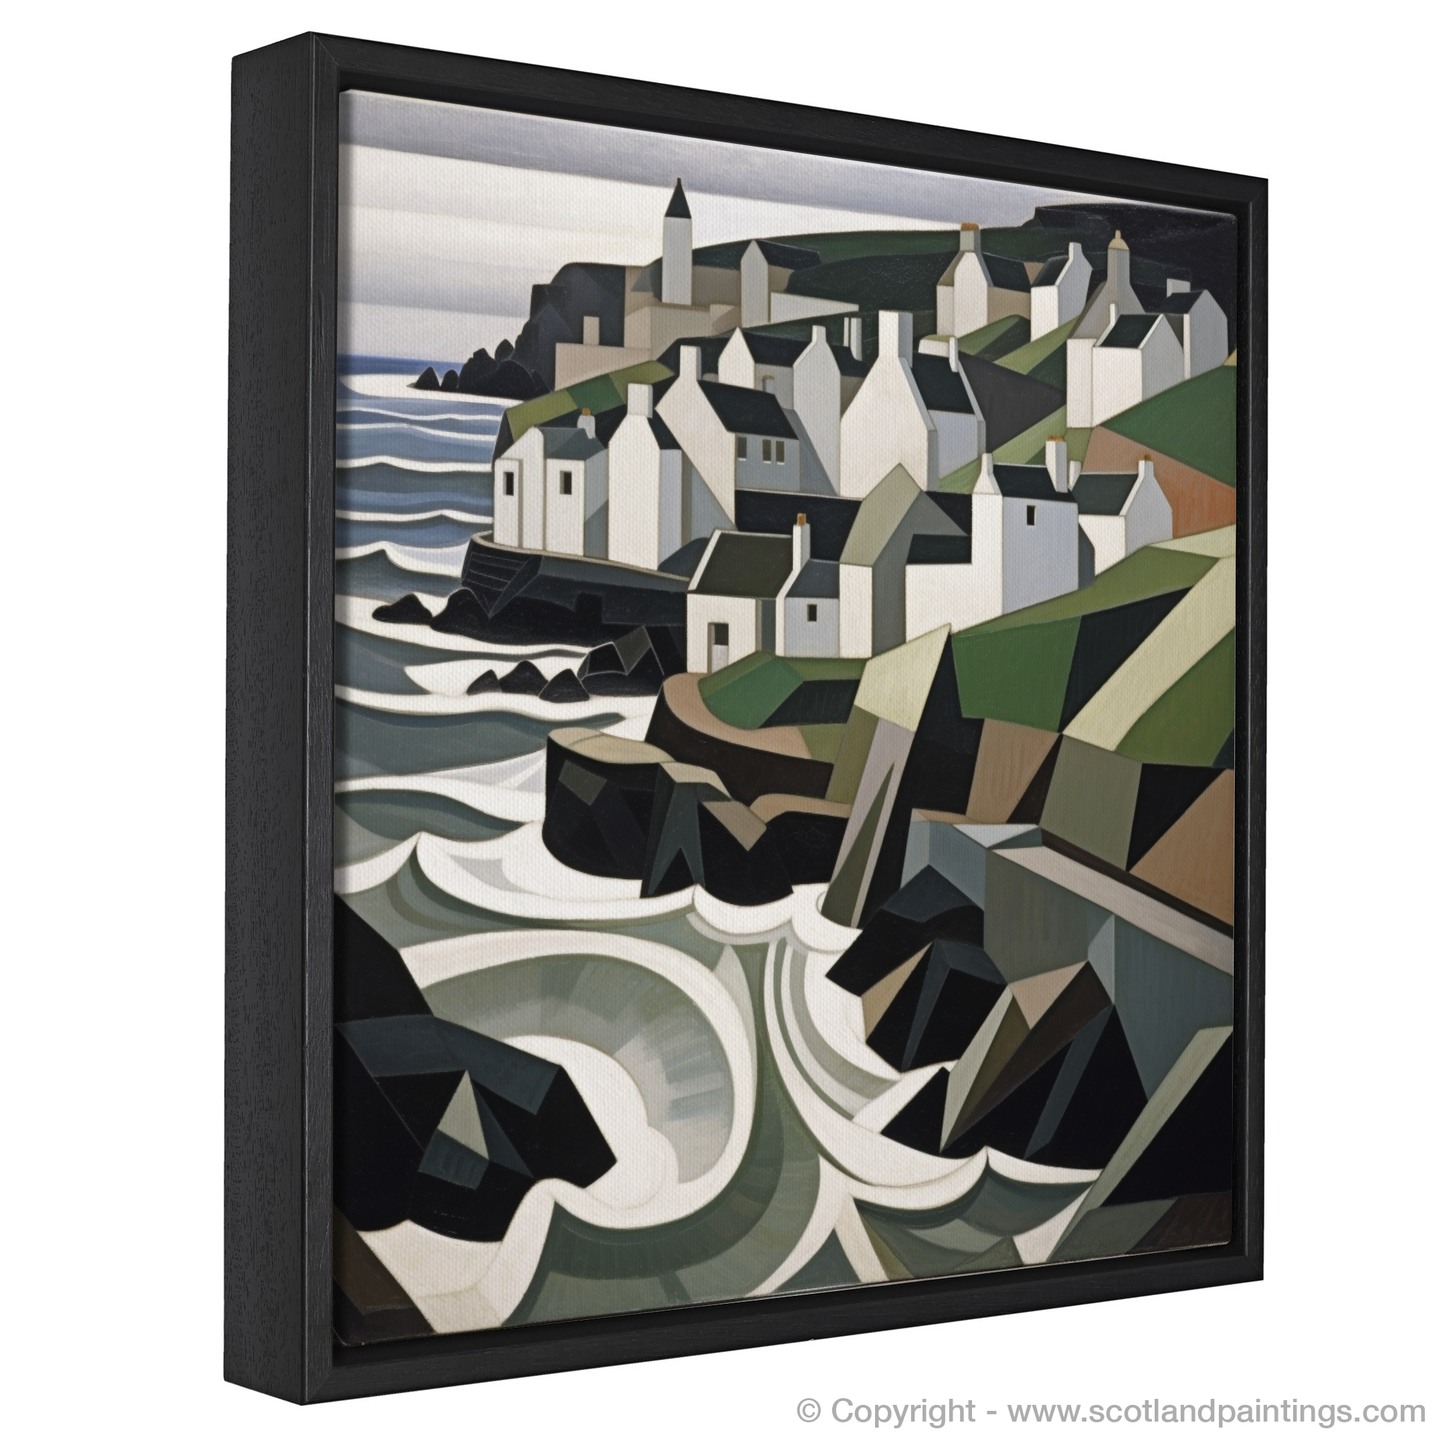 Pennan Reimagined: A Cubist Ode to Scottish Charm